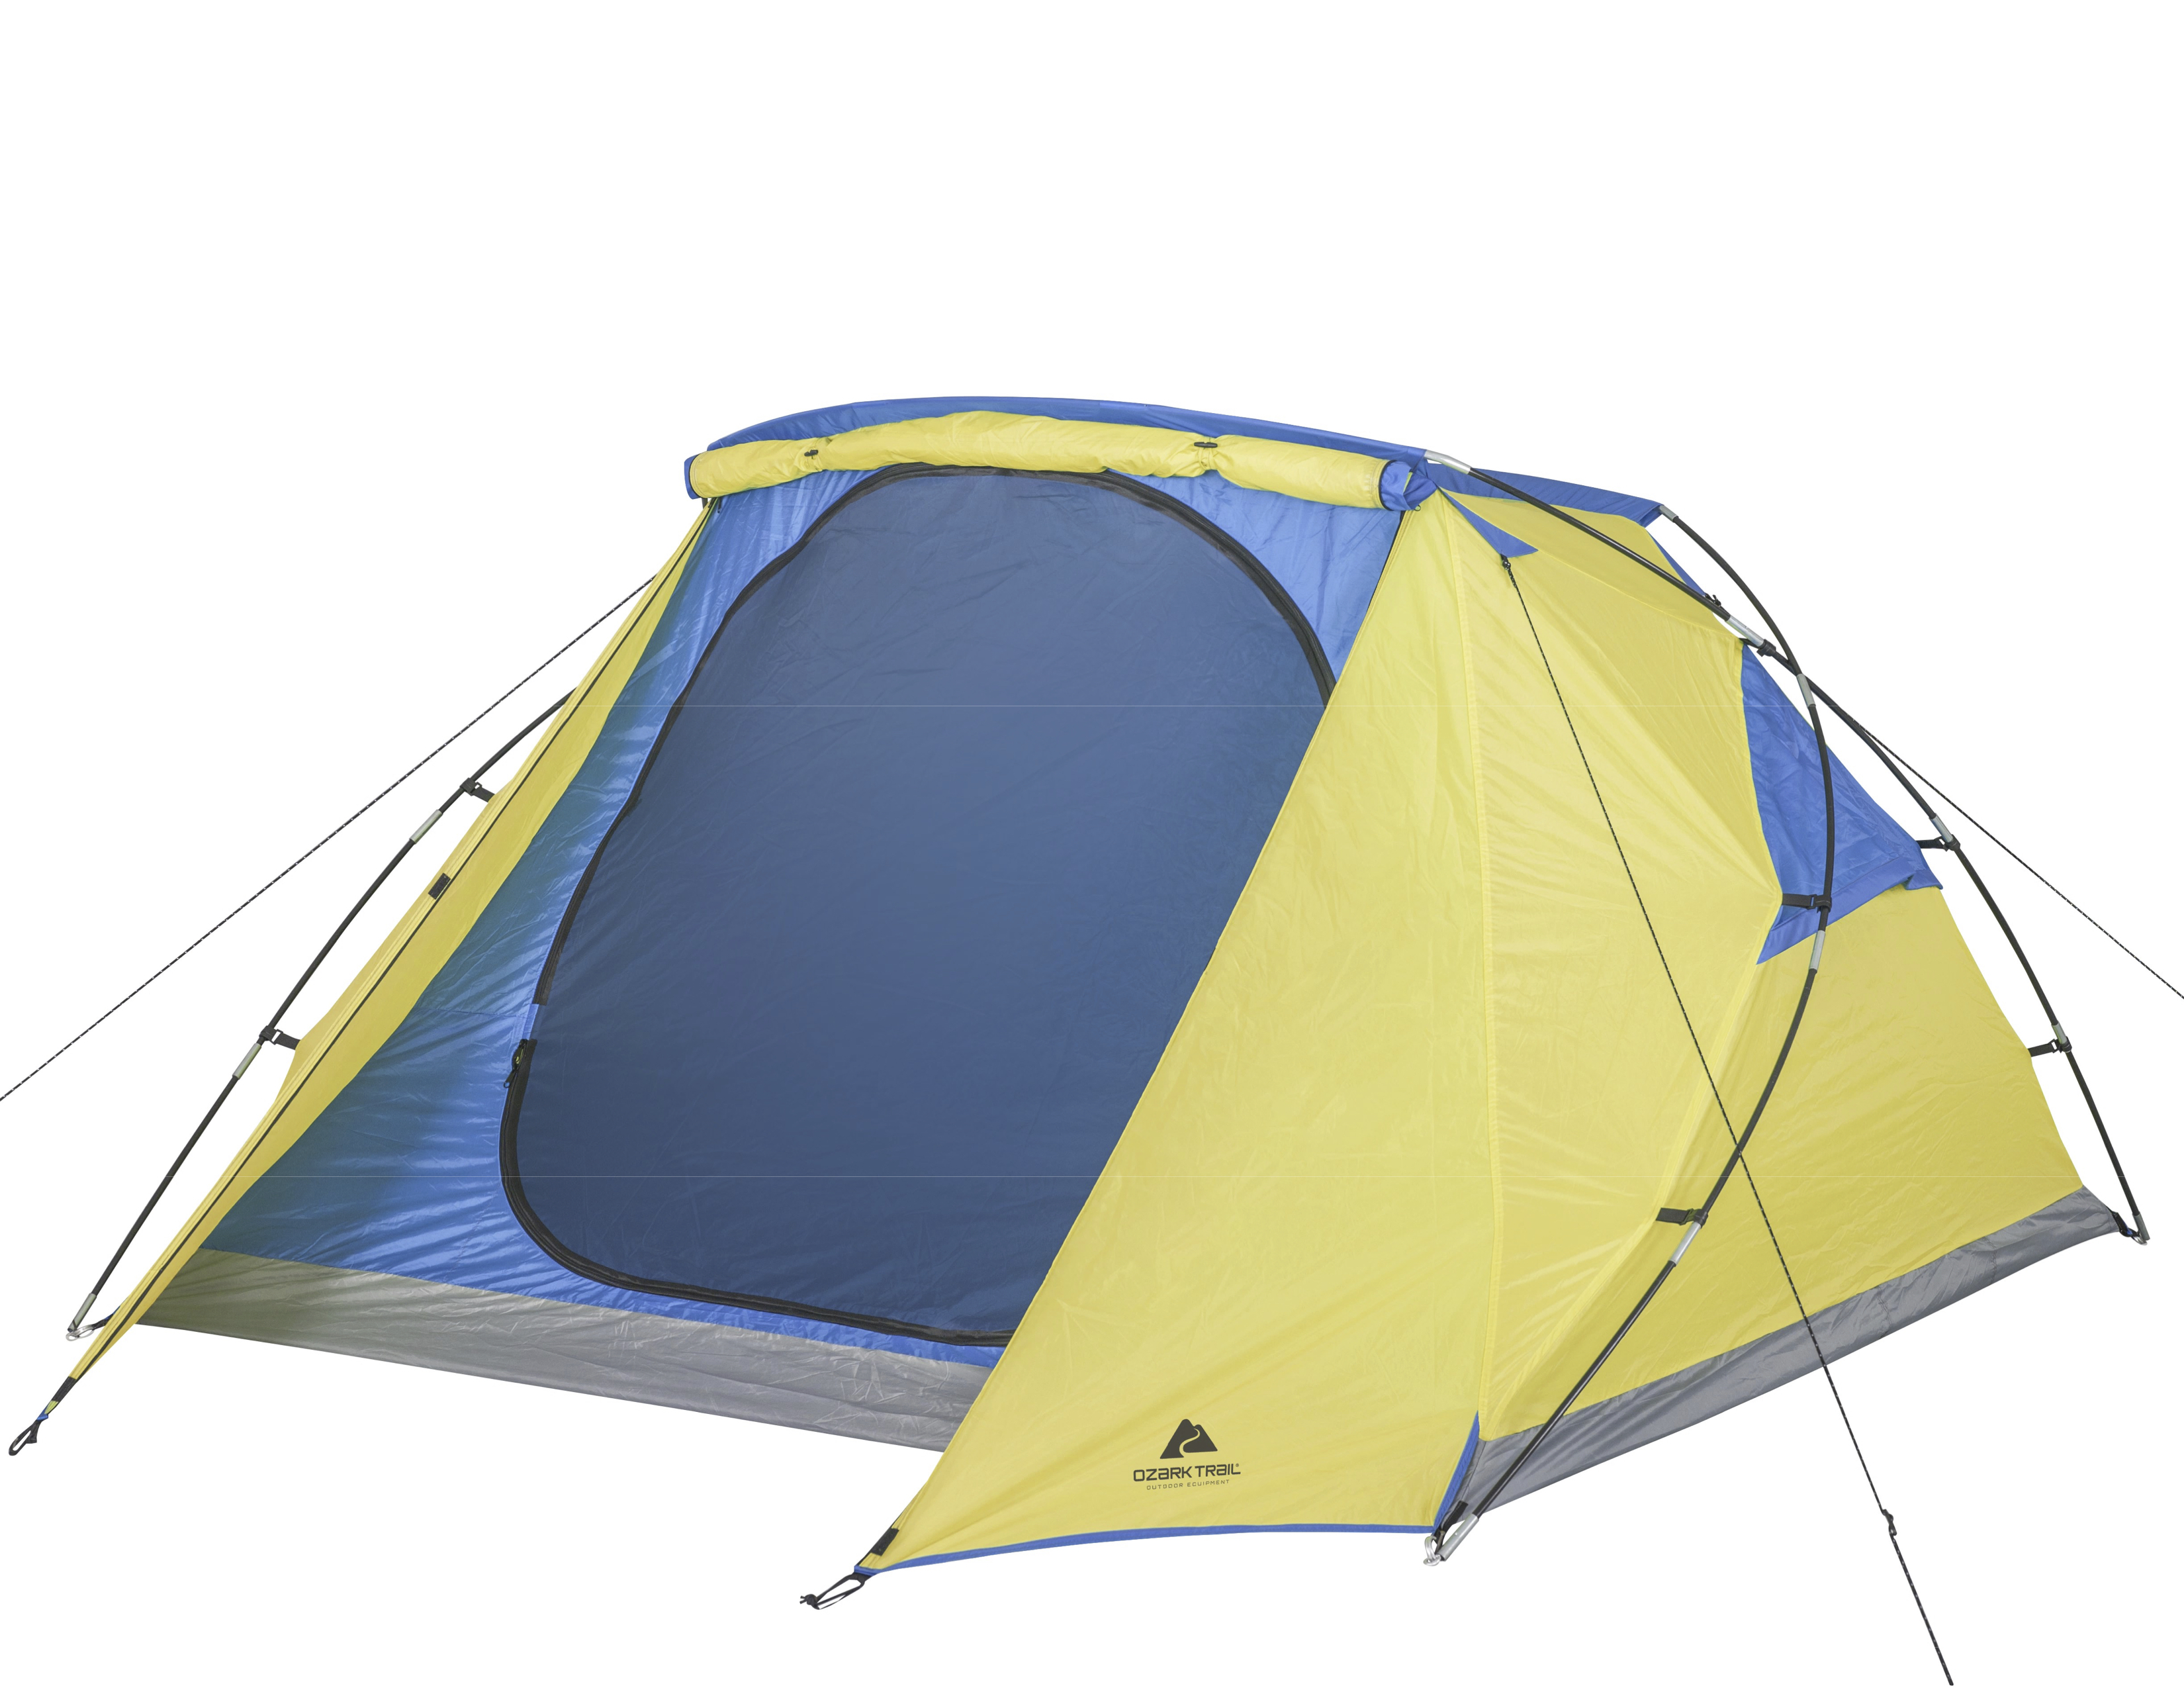 Ozark Trail 3-Person Backpacking Tent - image 1 of 12